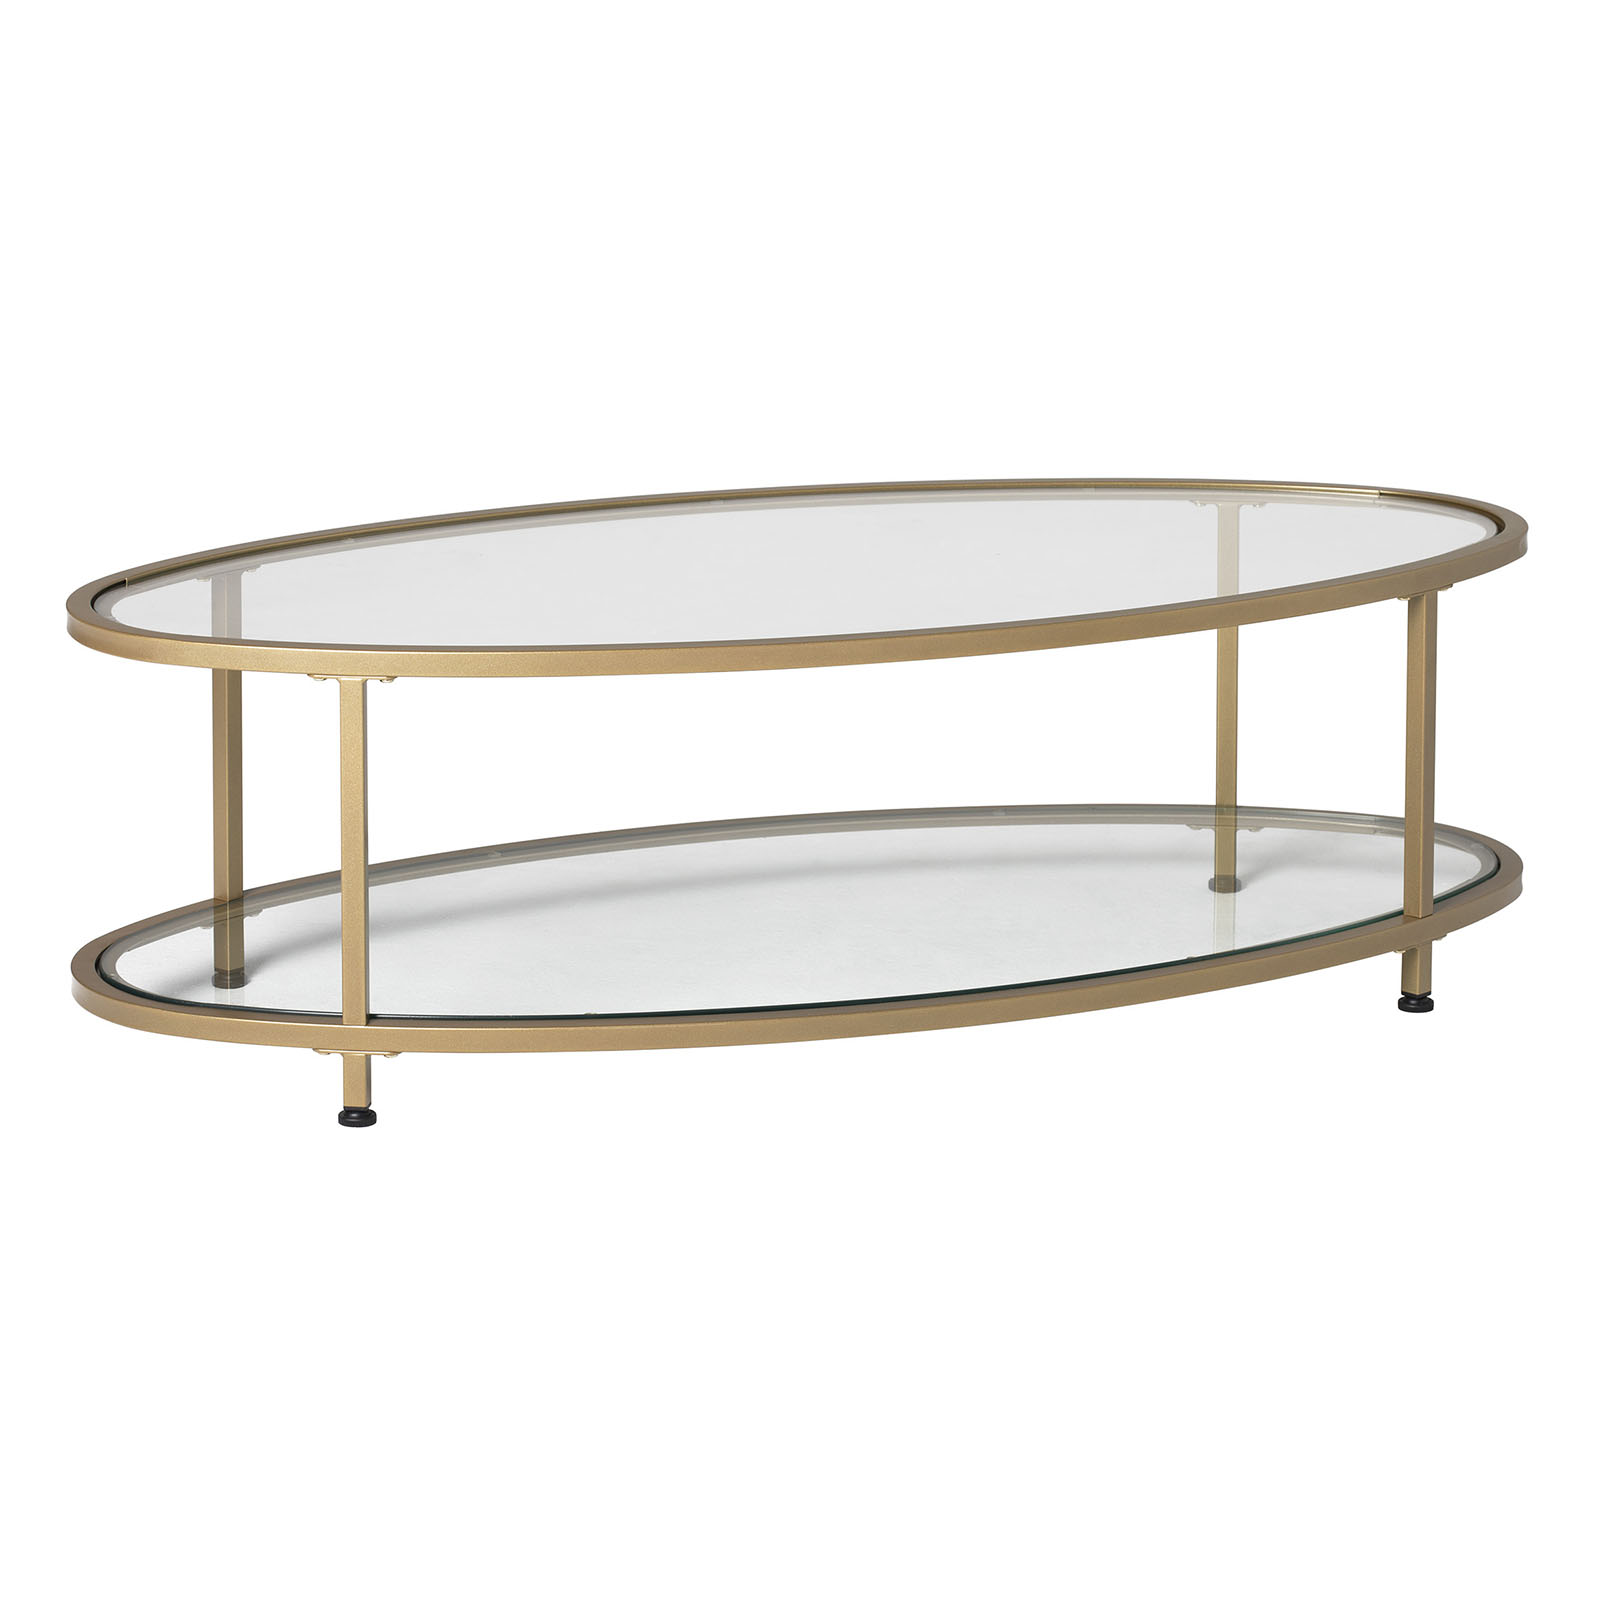 71038 Camber Oval Coffee Table